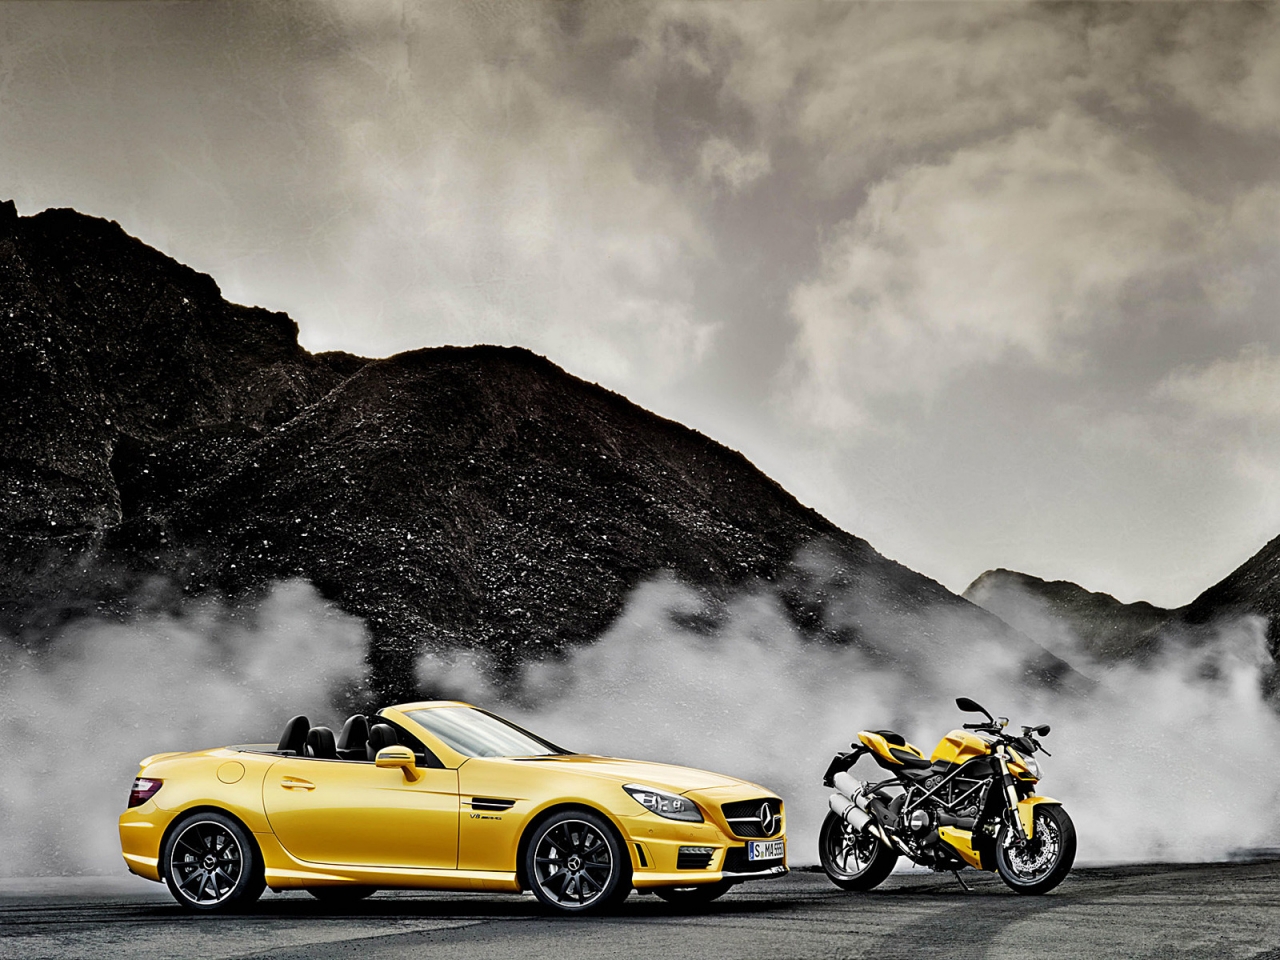 Mercedes SLK AMG and Ducati Streetfighter for 1280 x 960 resolution